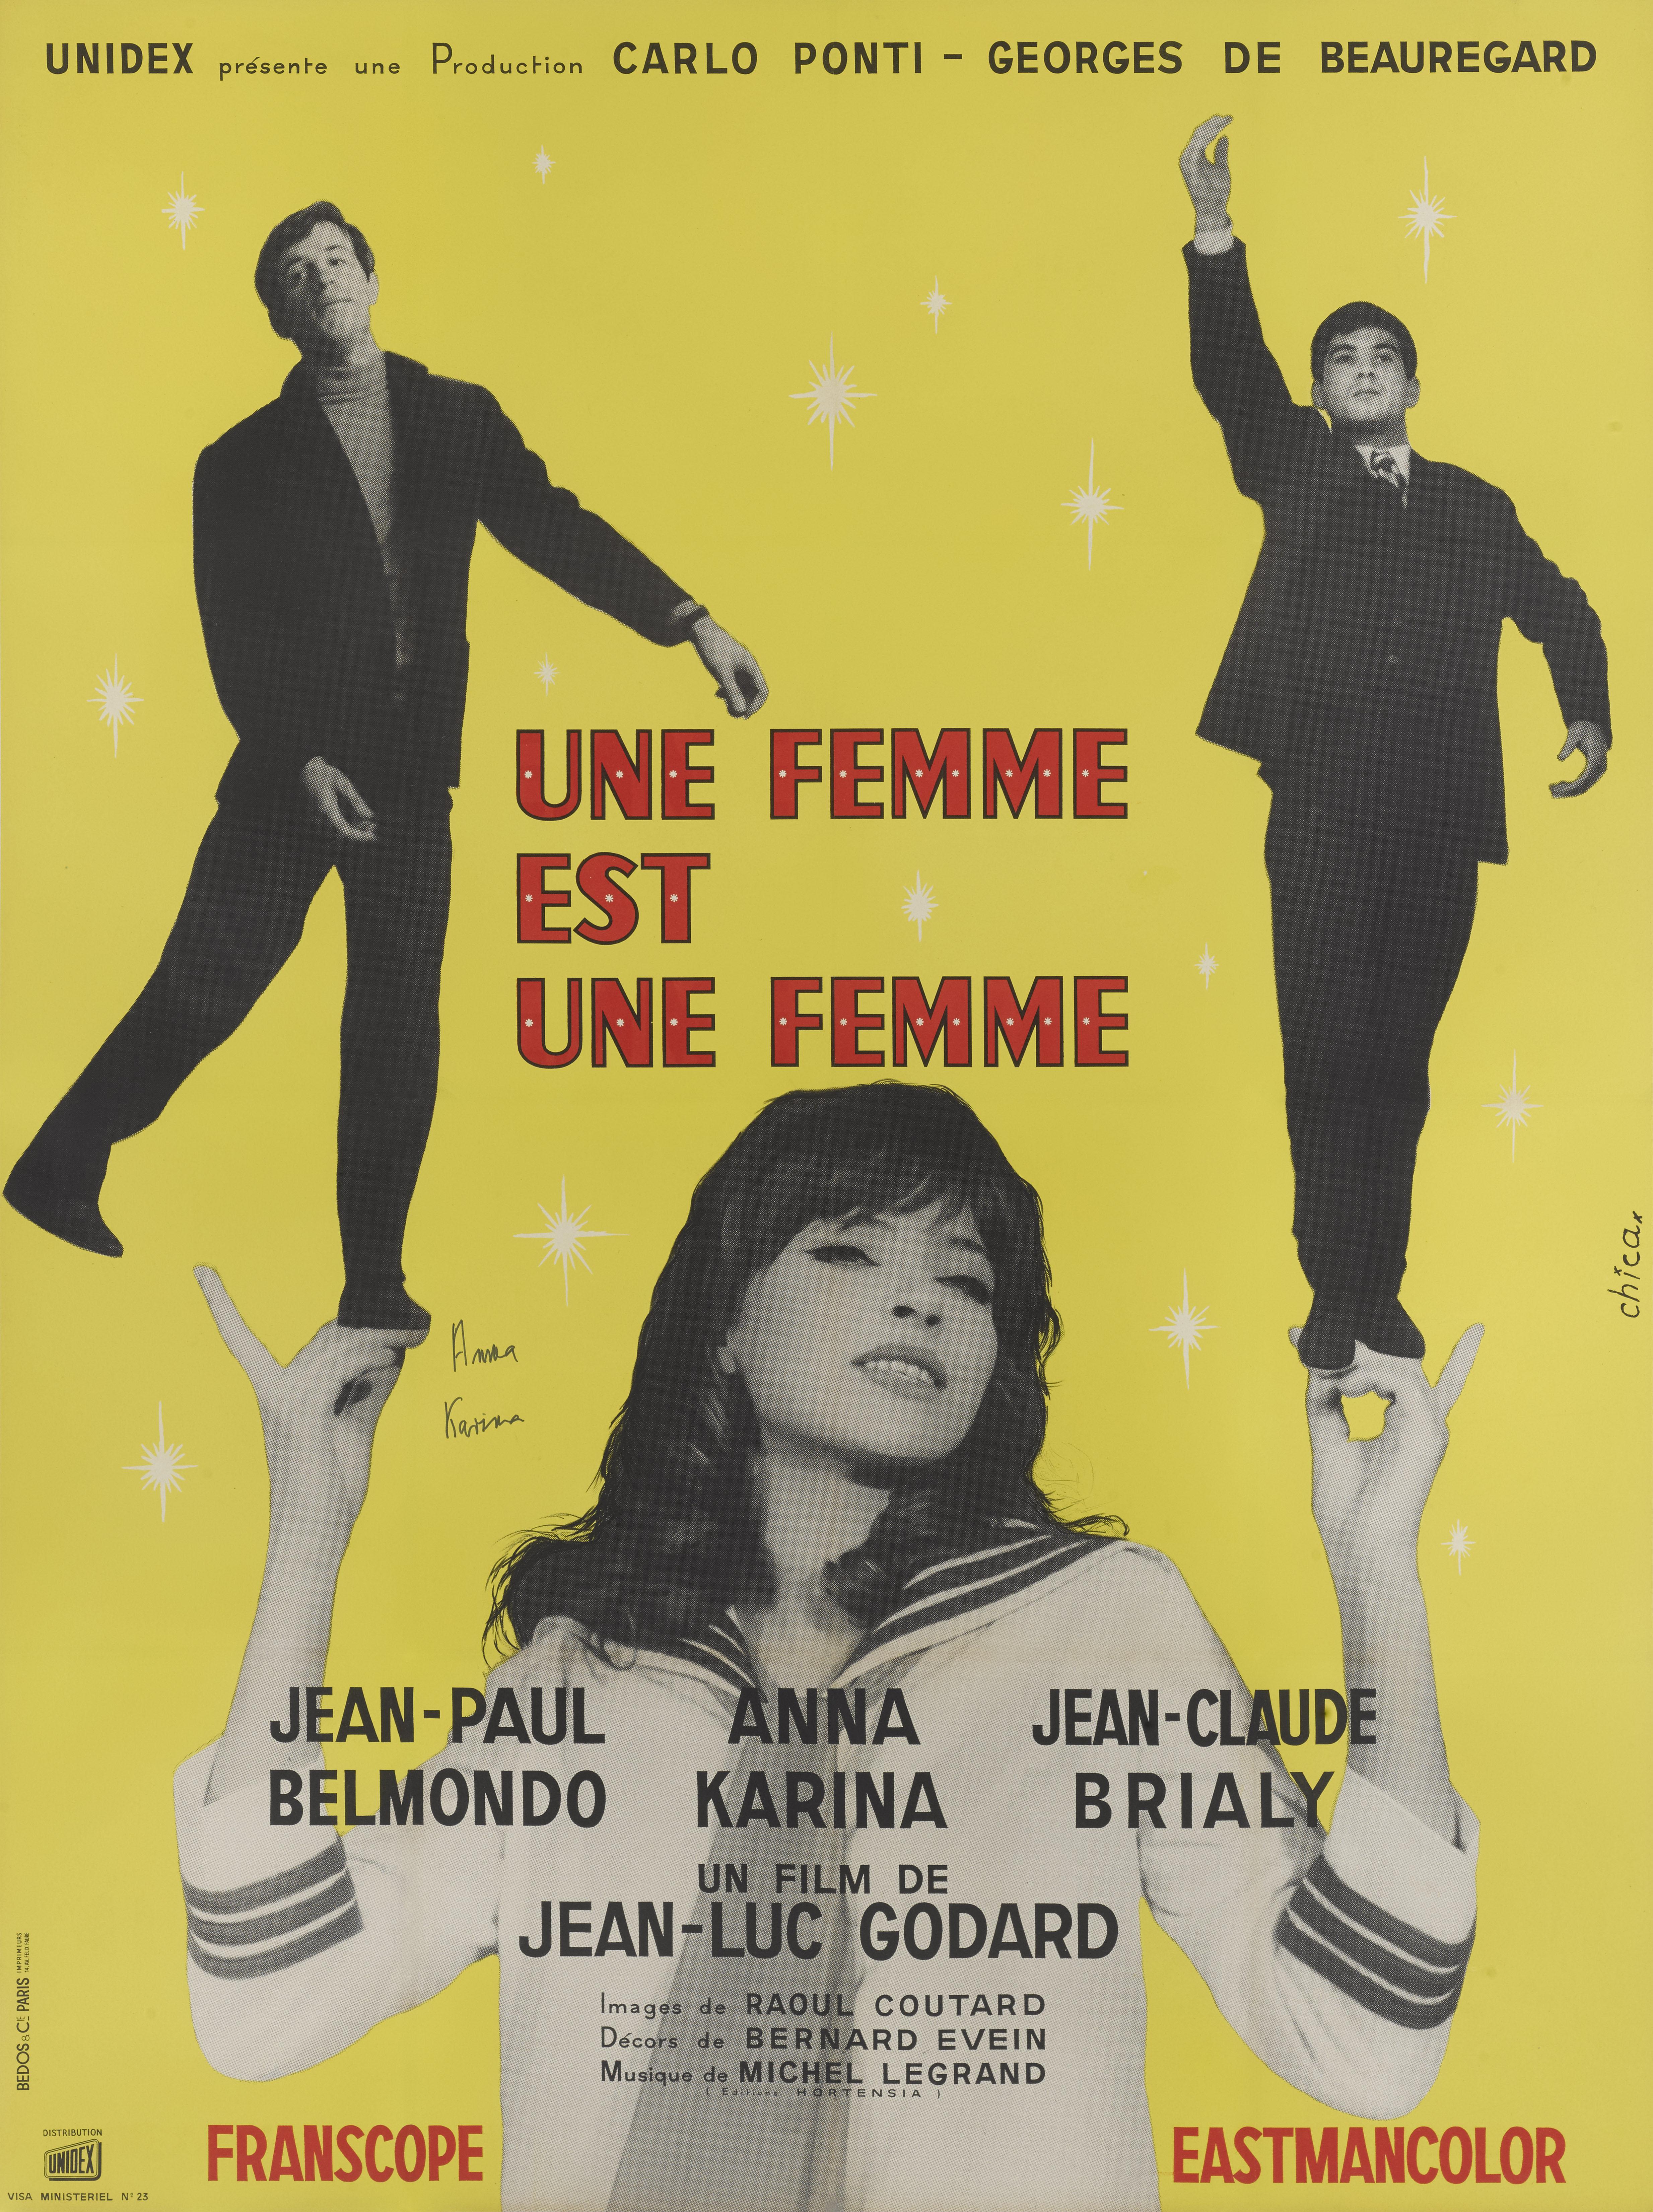 Original French film poster for Jean-Luc Godard's 1961 French New Wave film Une Femme / A Woman is a Woman.
This French film was written and directed by Jean-Luc Godard, and stars Anna Karina, Jean-Claude Brialy and Jean-Paul Belmondo. Anna Karina